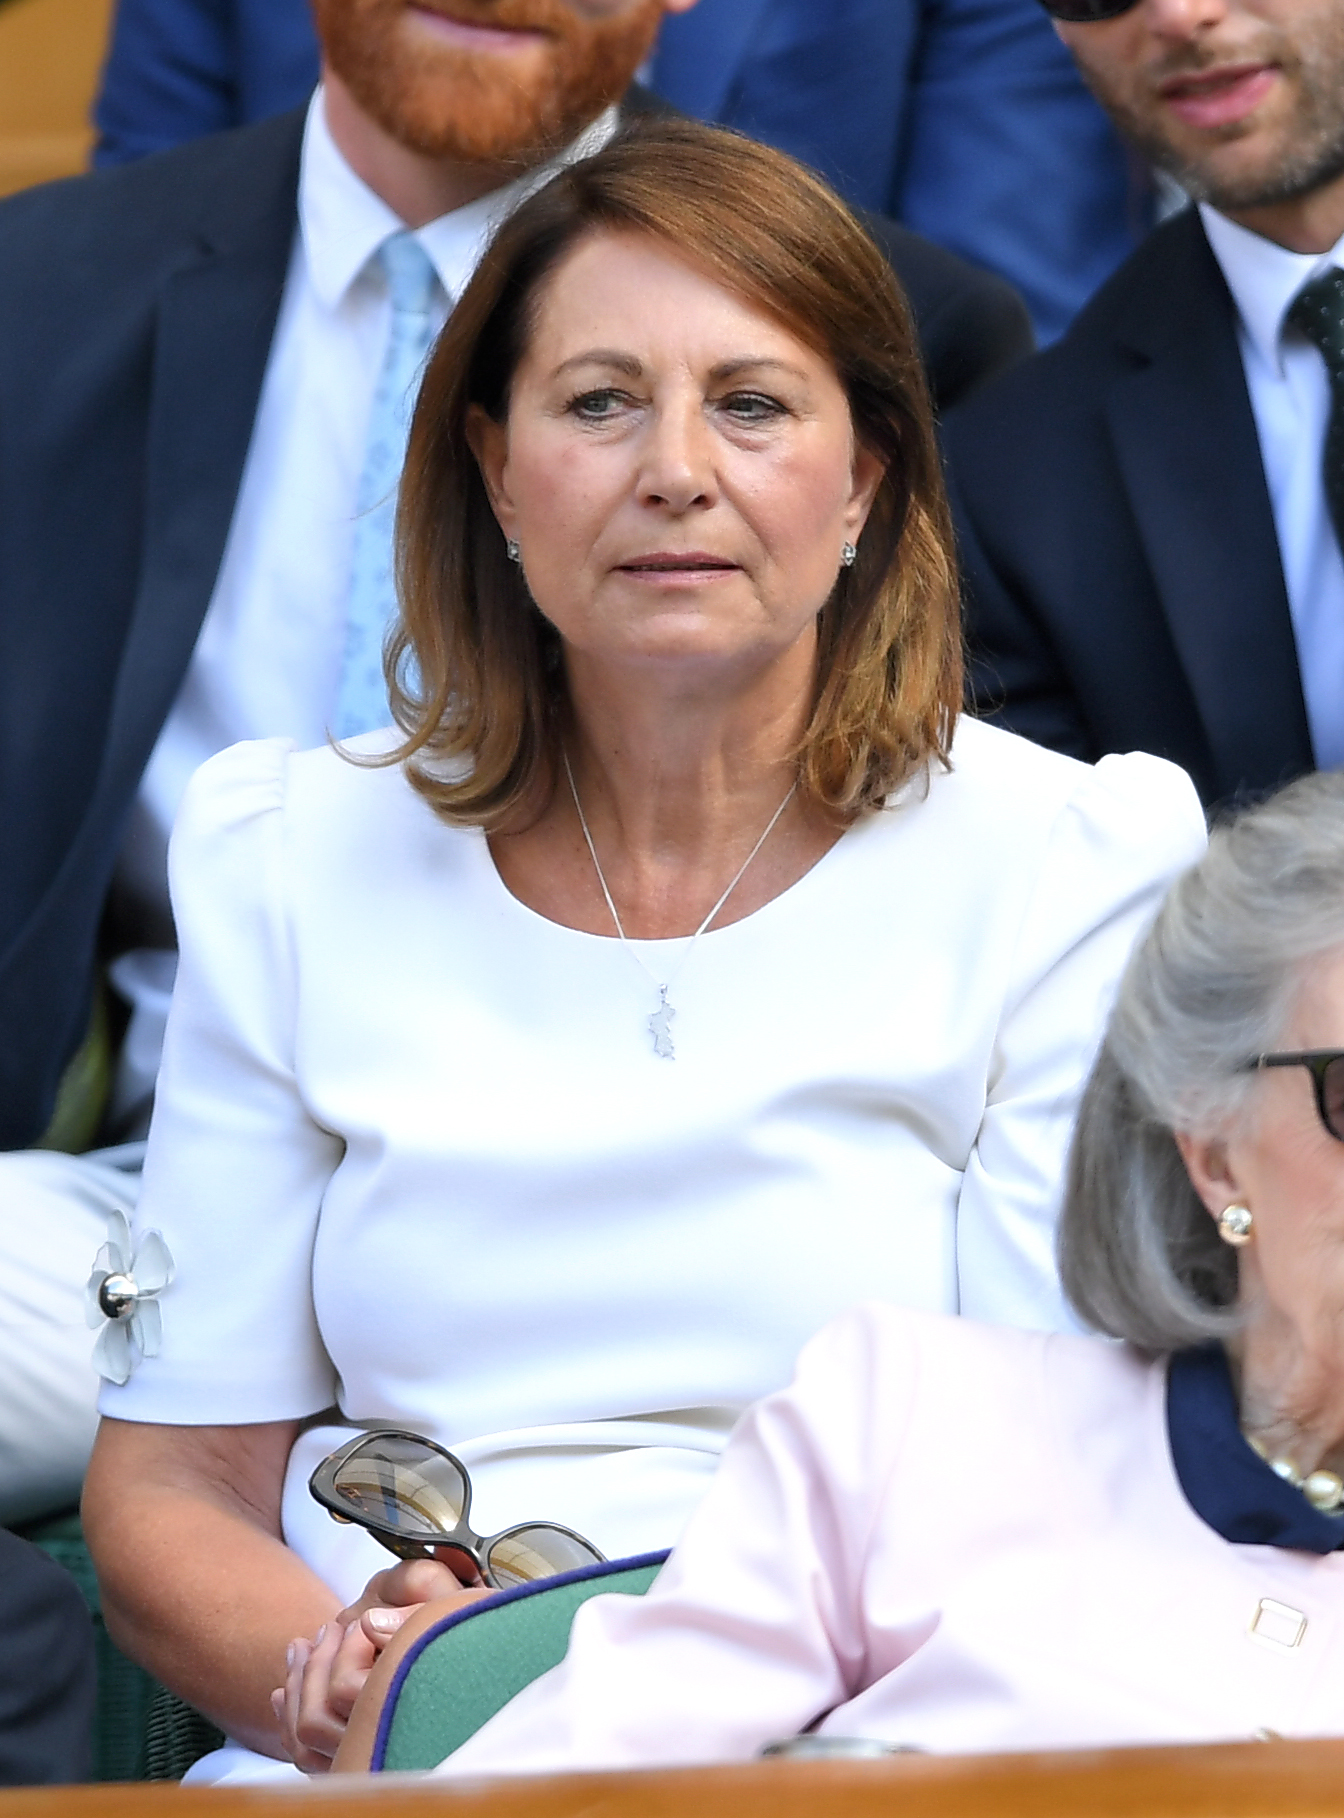 Carole Middleton at the Wimbledon Tennis Championships in London, England on July 3, 2019 | Source: Getty Images